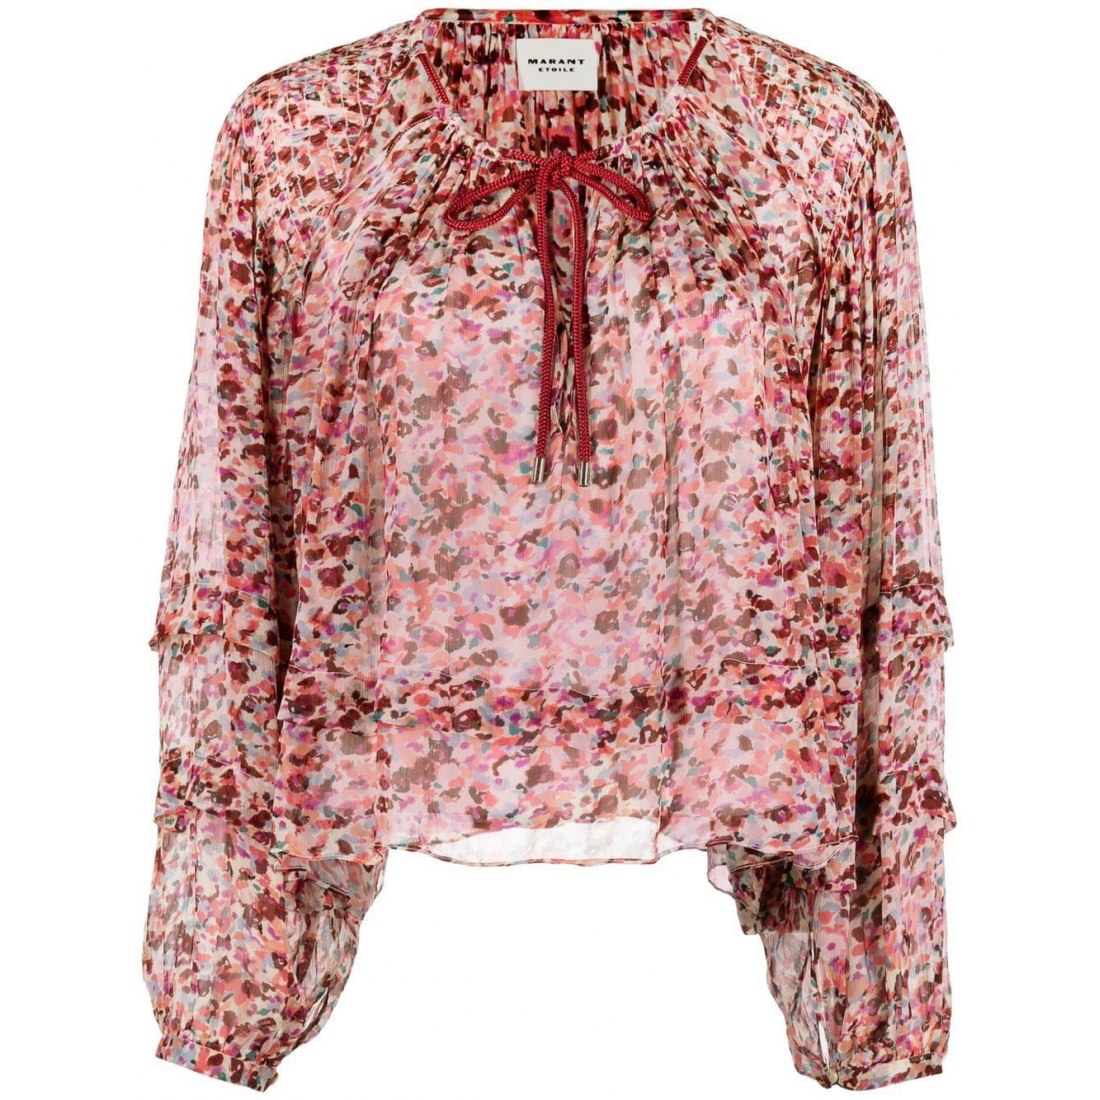 Women's 'Abstract' Long Sleeve Blouse